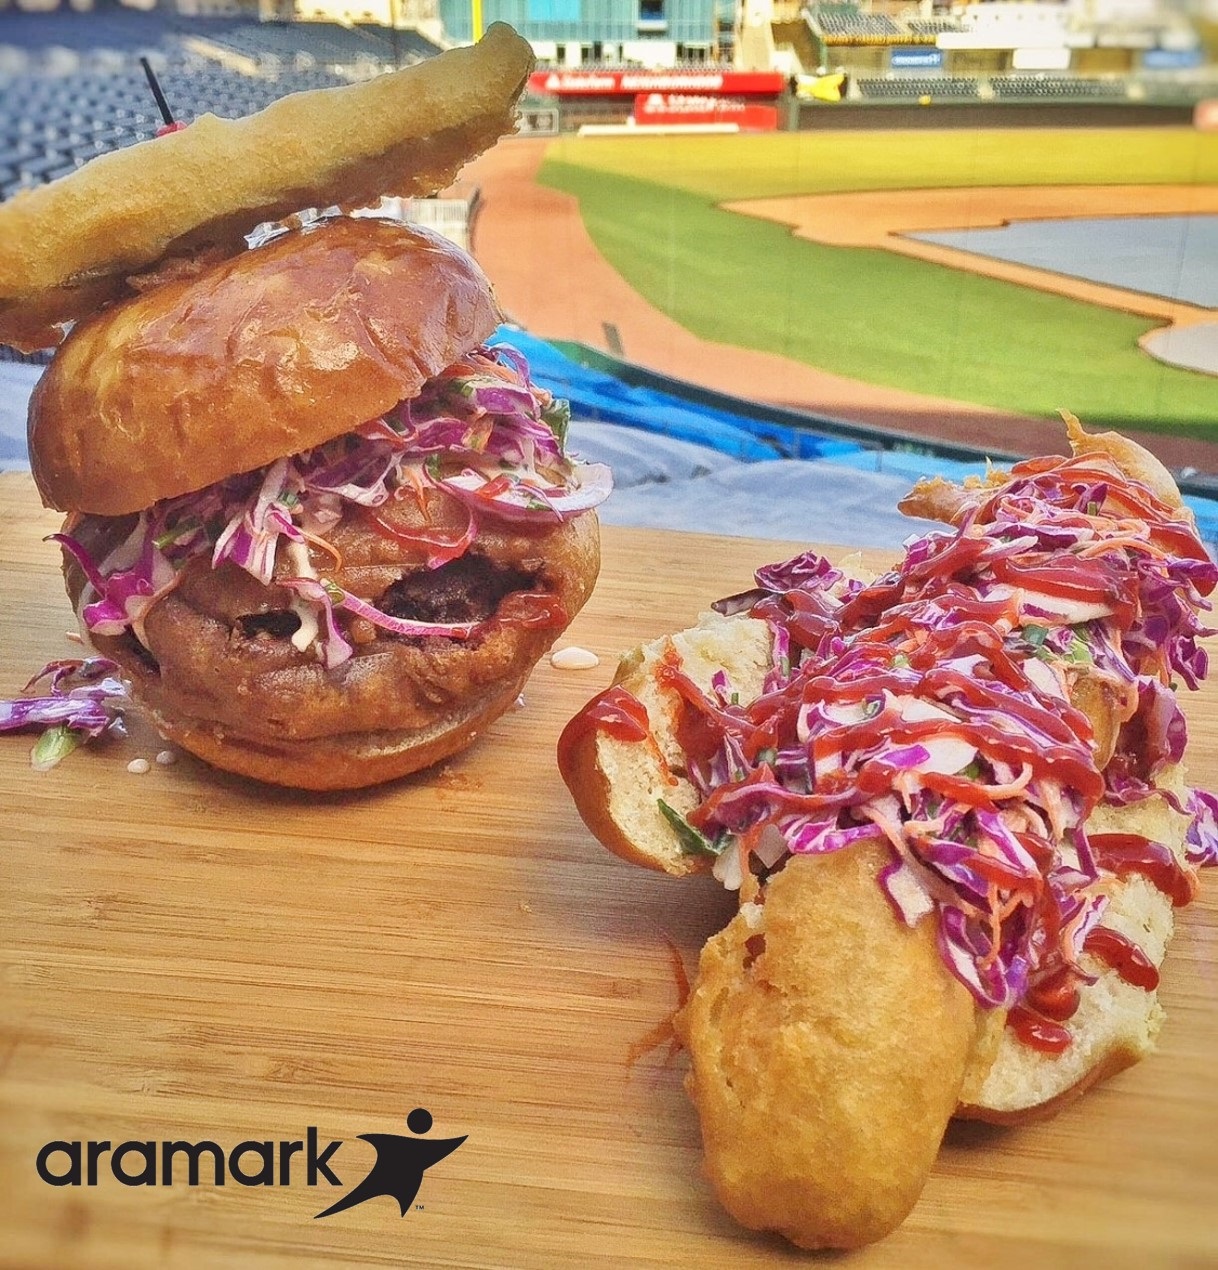 PHOTO: The Kansas City Royals are debuting a Champions Alley Burger this season, which features a cheese stuffed, tempura battered, cheddar bacon burger with sweet slaw, chipotle ketchup and fried pickle on a local roll.